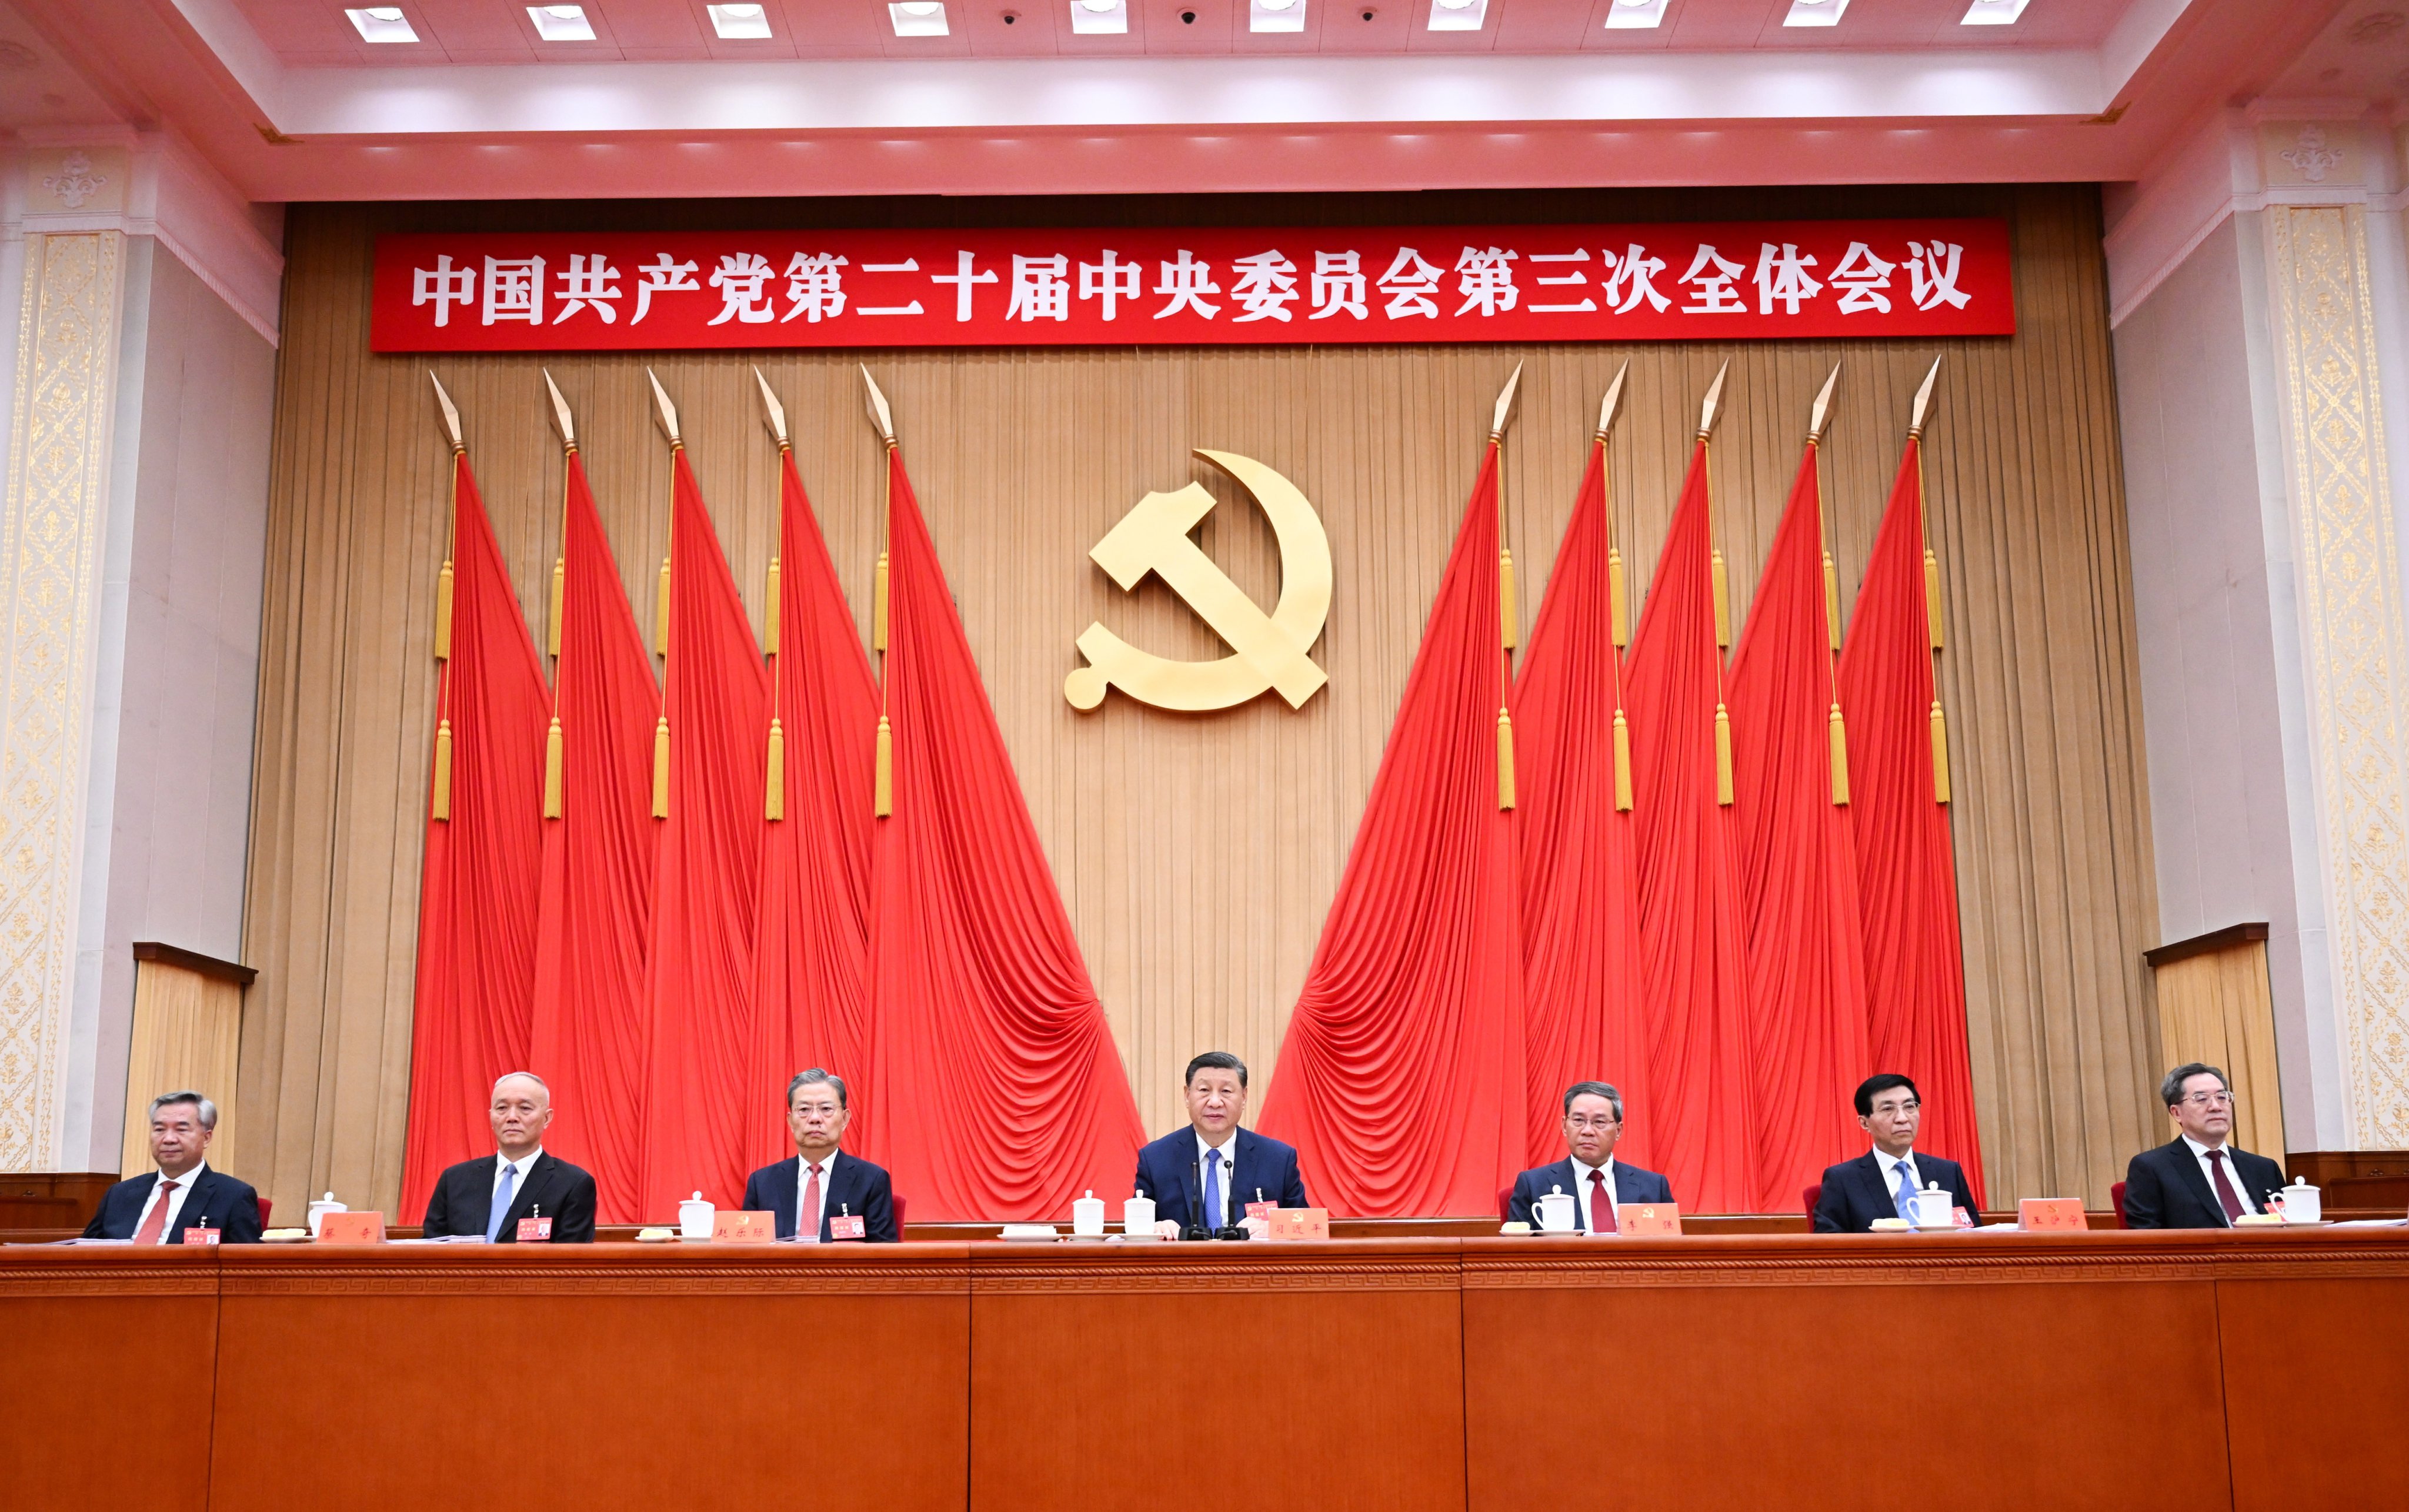 President Xi Jinping (centre) at the third plenary session in Beijing this month. Photo: Xinhua